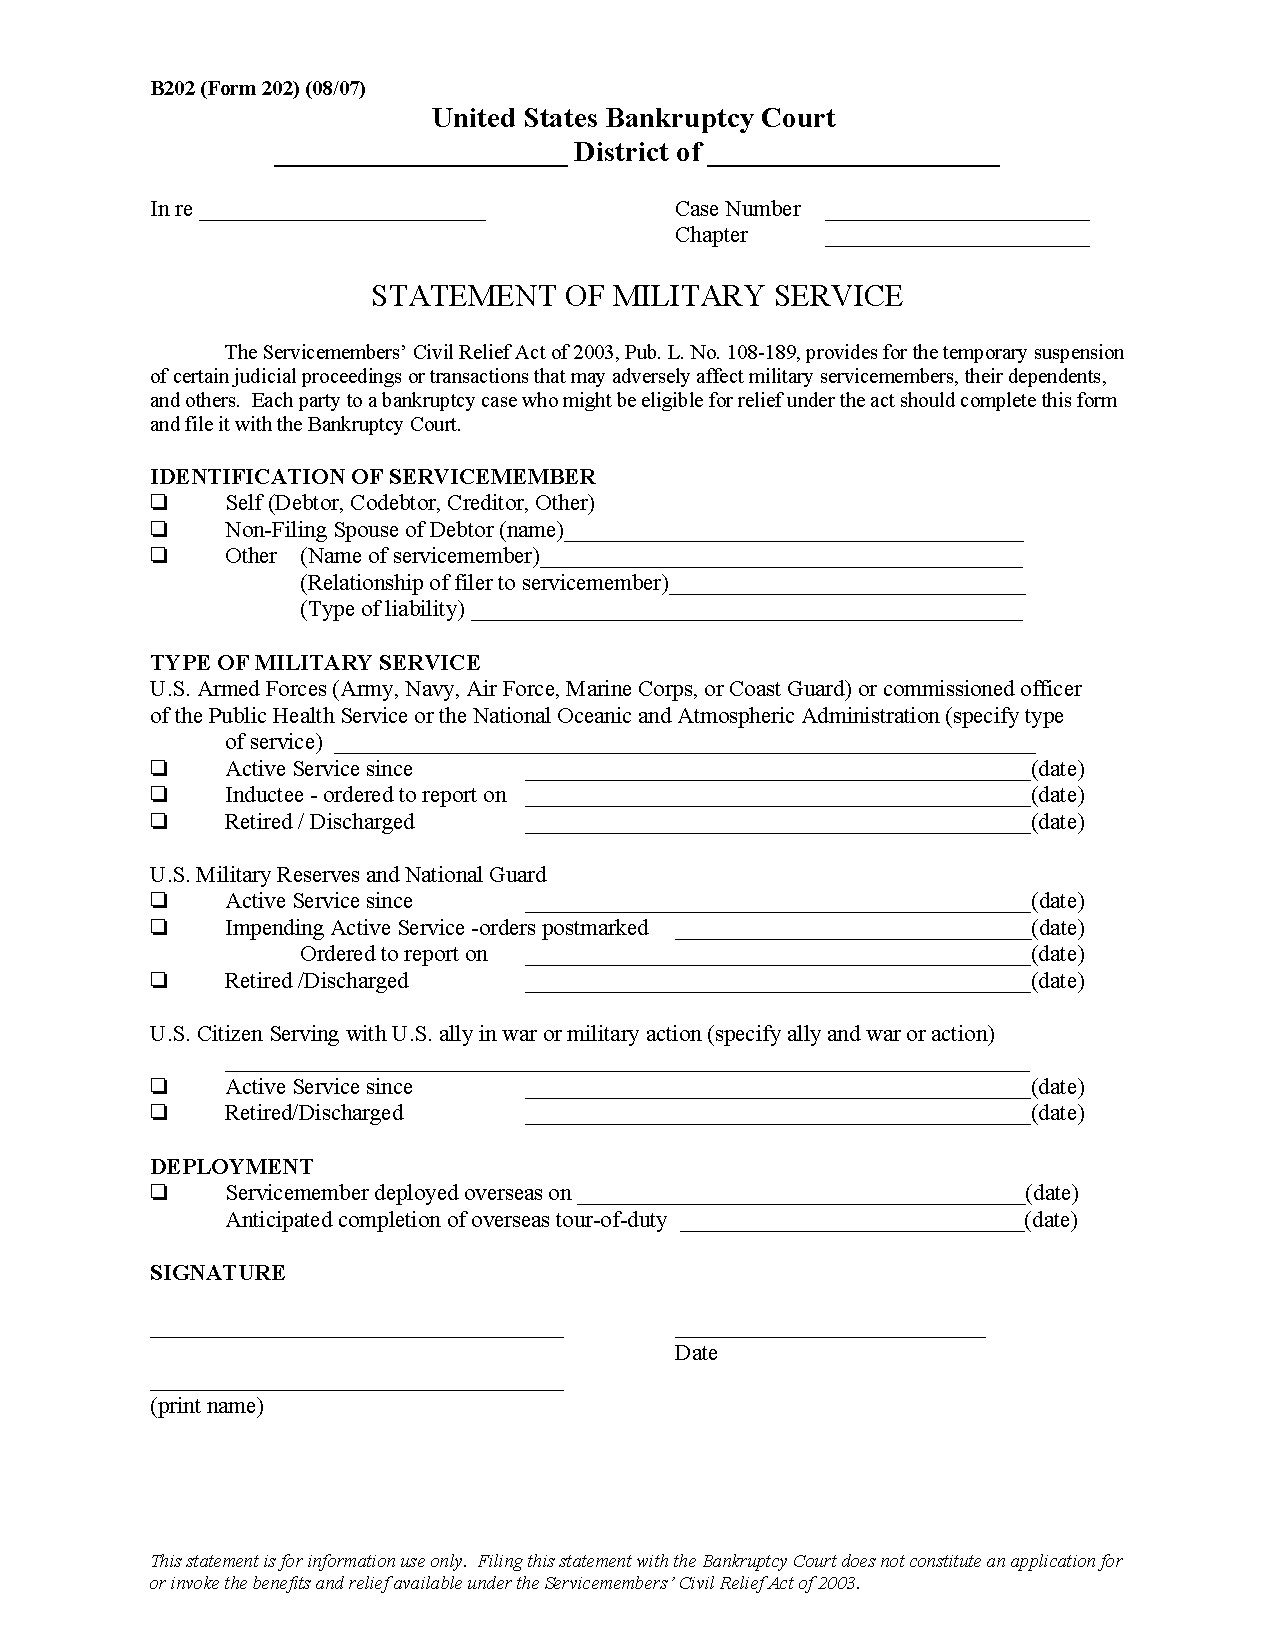 Form B 202 Statement of Military Service 08 07